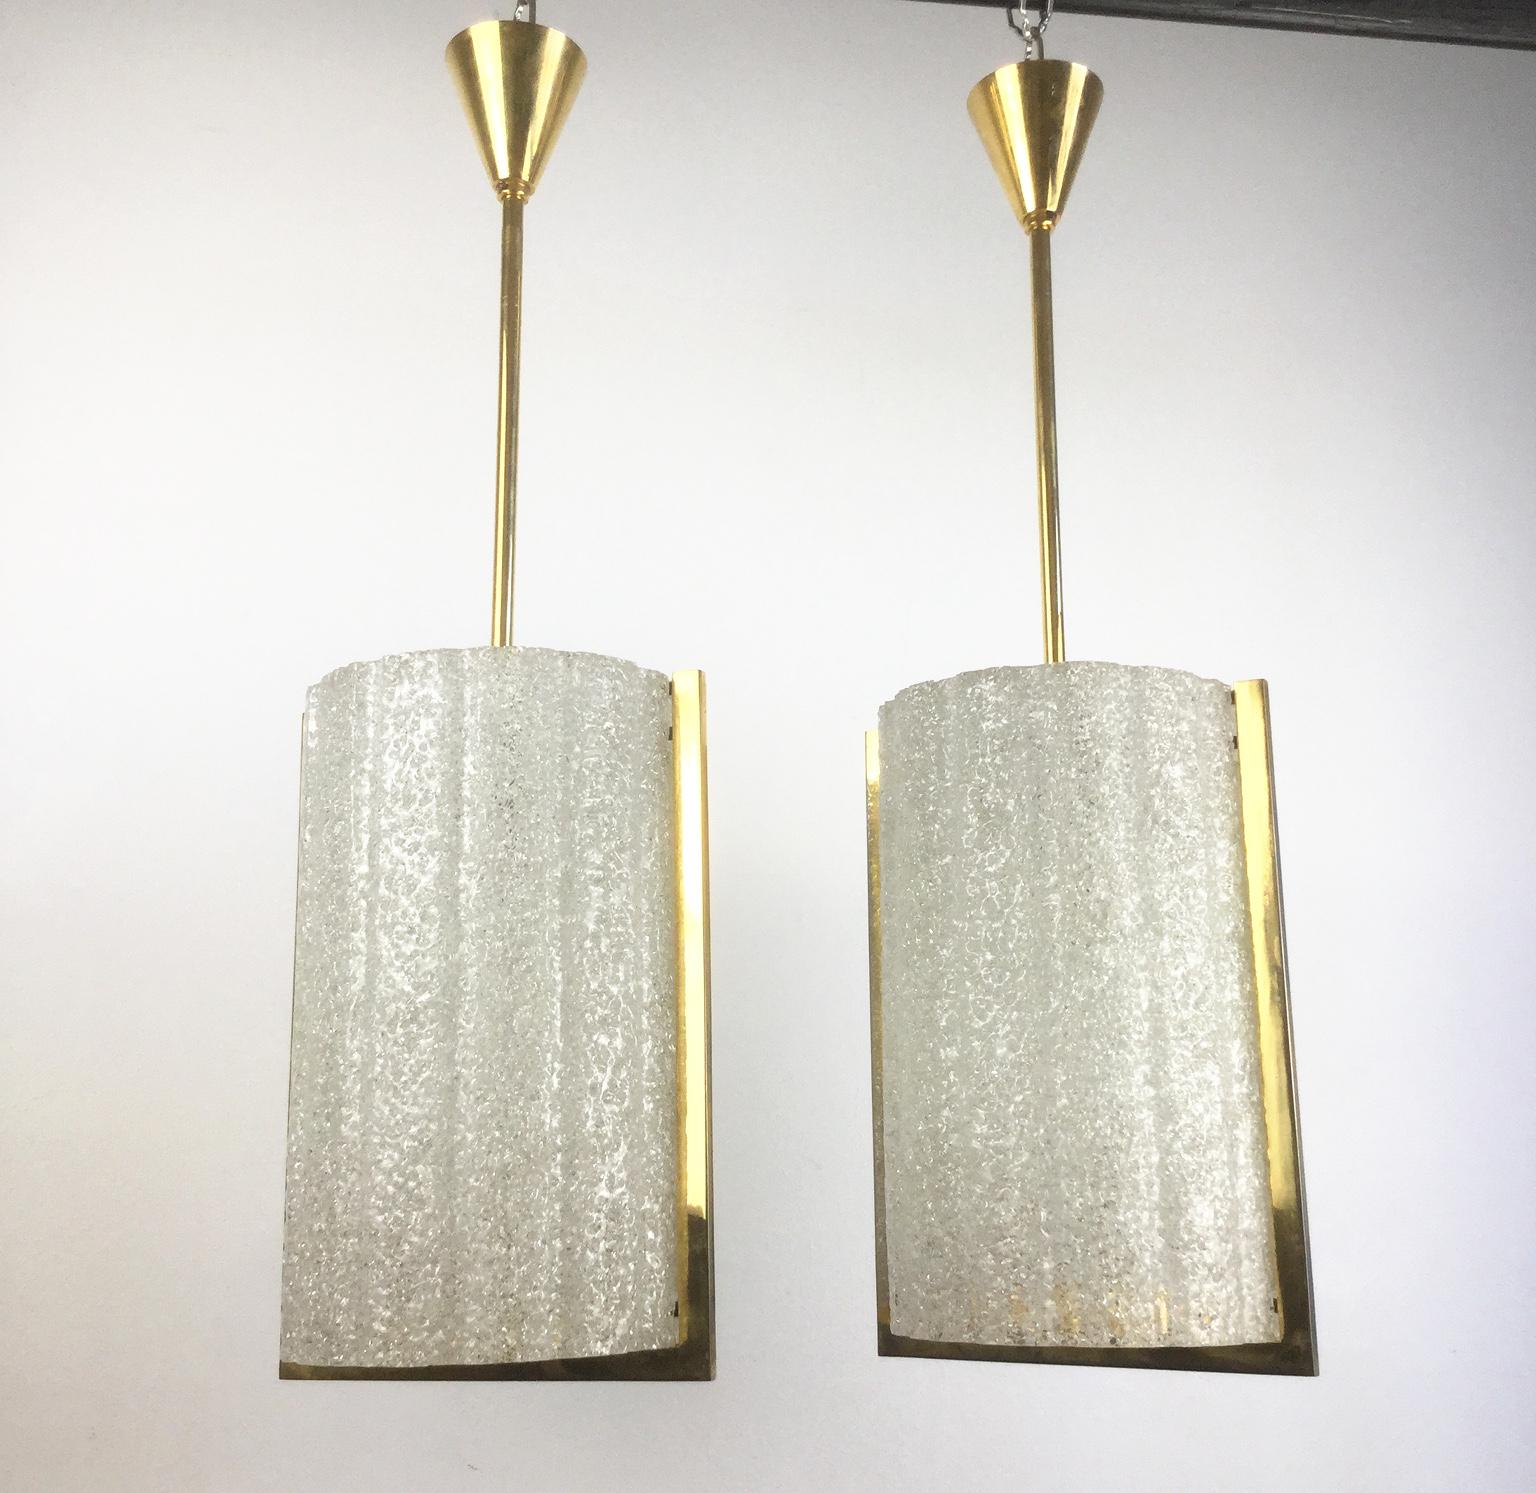 1960s, set of 4 opalescent resin and polished brass chandeliers or pendant lamps
Attributed to Maison Arlus France.